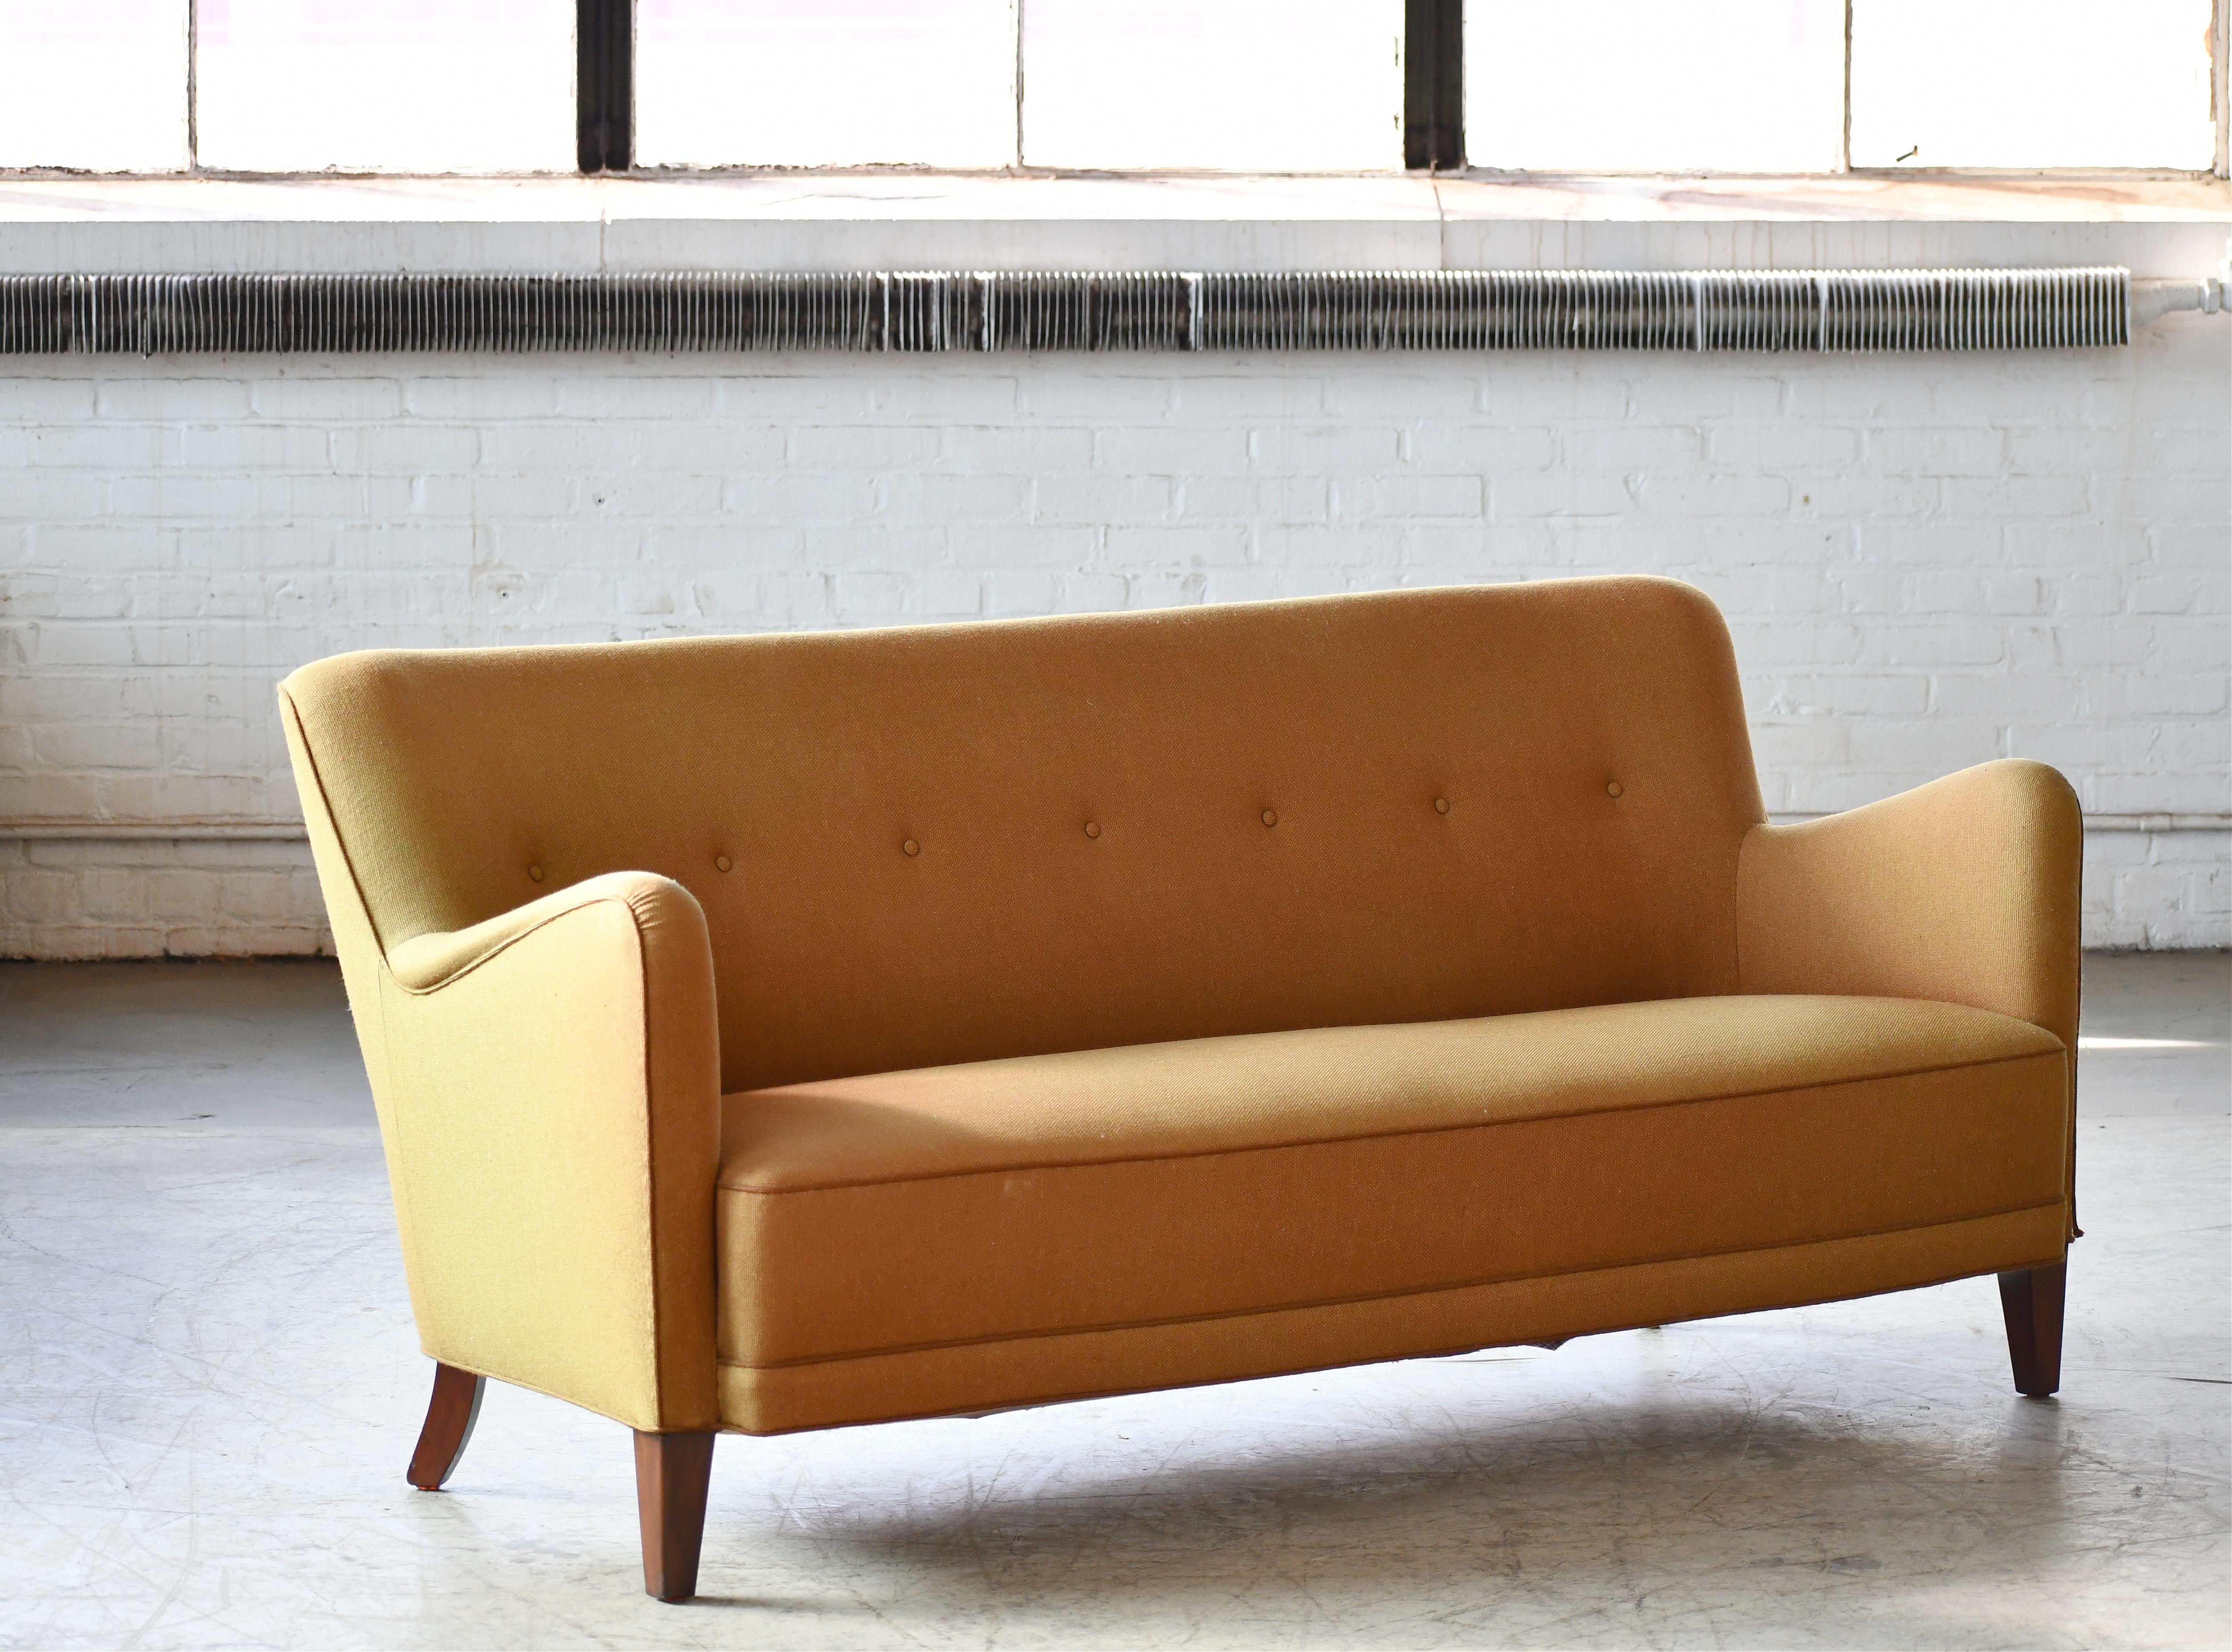 Very classic and ultra cool Danish three-seat sofa epitomizing the 1950s and likely a variant of Fritz Hansen's famous model 1669. Just the shape of the legs vary slightly from the 1940s original. Built on a sturdy beech wood frame and raised on